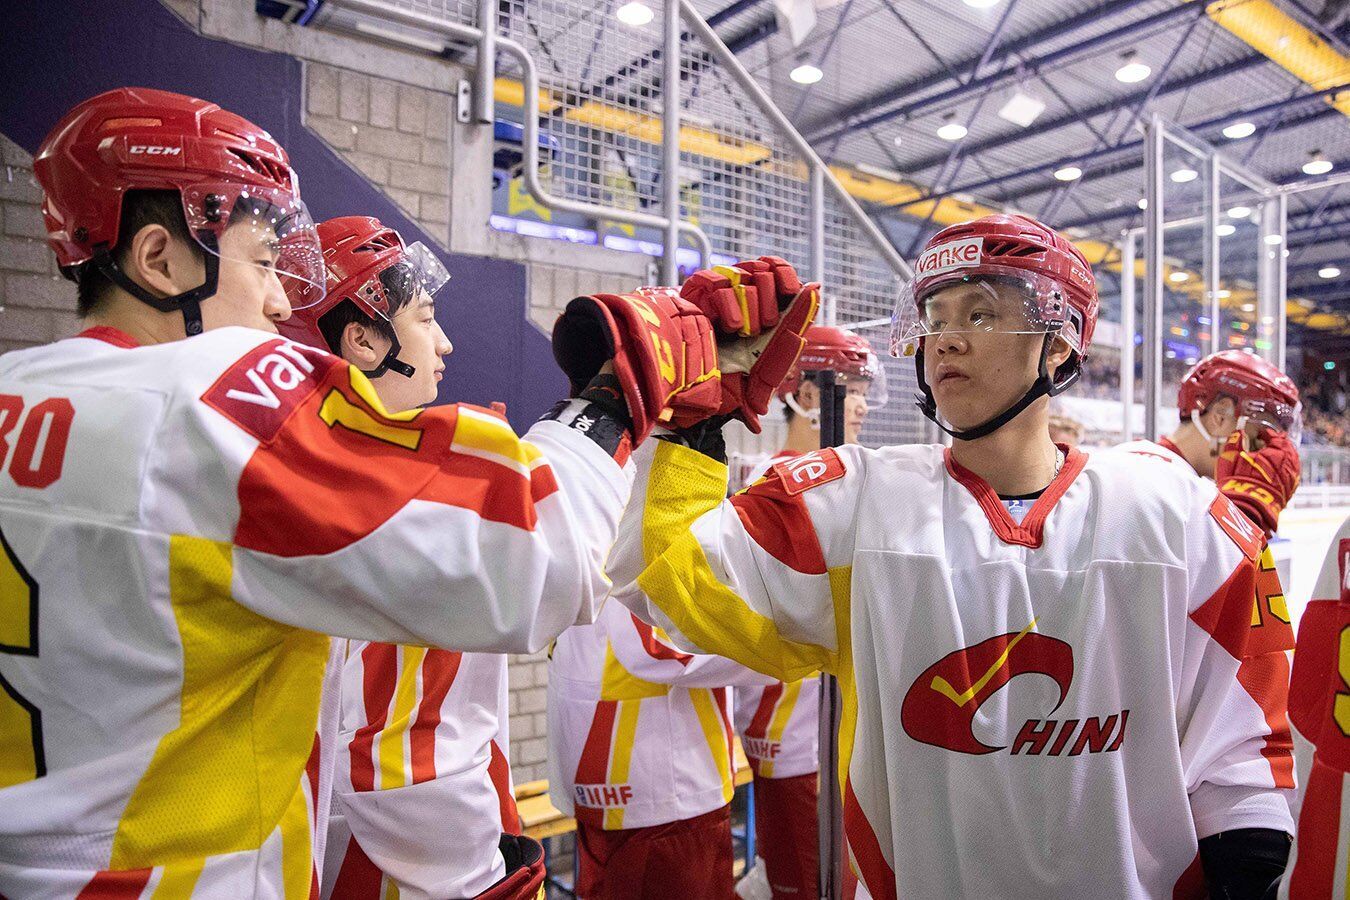 Chinese national hockey team banned from playing in tournament in Russia